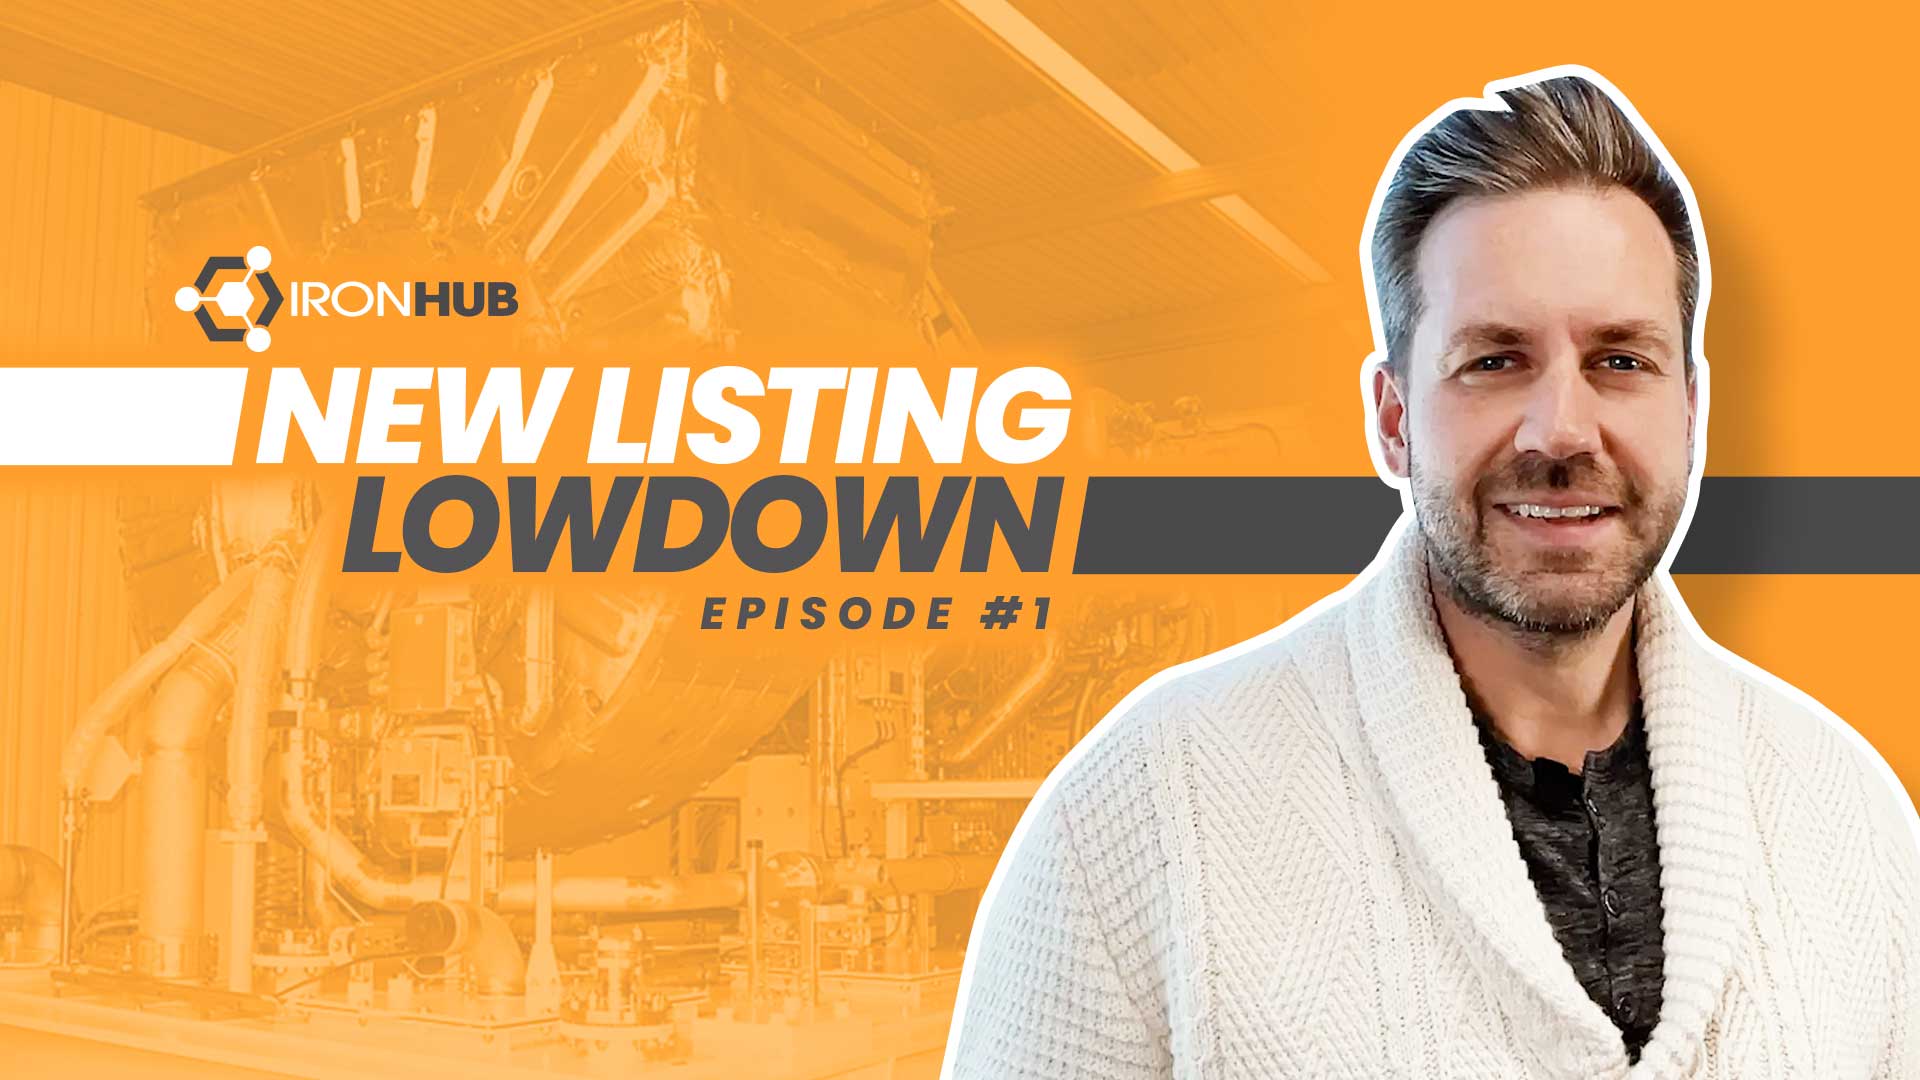 Canadian Oil & Gas Industry Surplus Equipment Collaboration: IronHub & Crusader Launch “New Listing Lowdown” - Episode 01